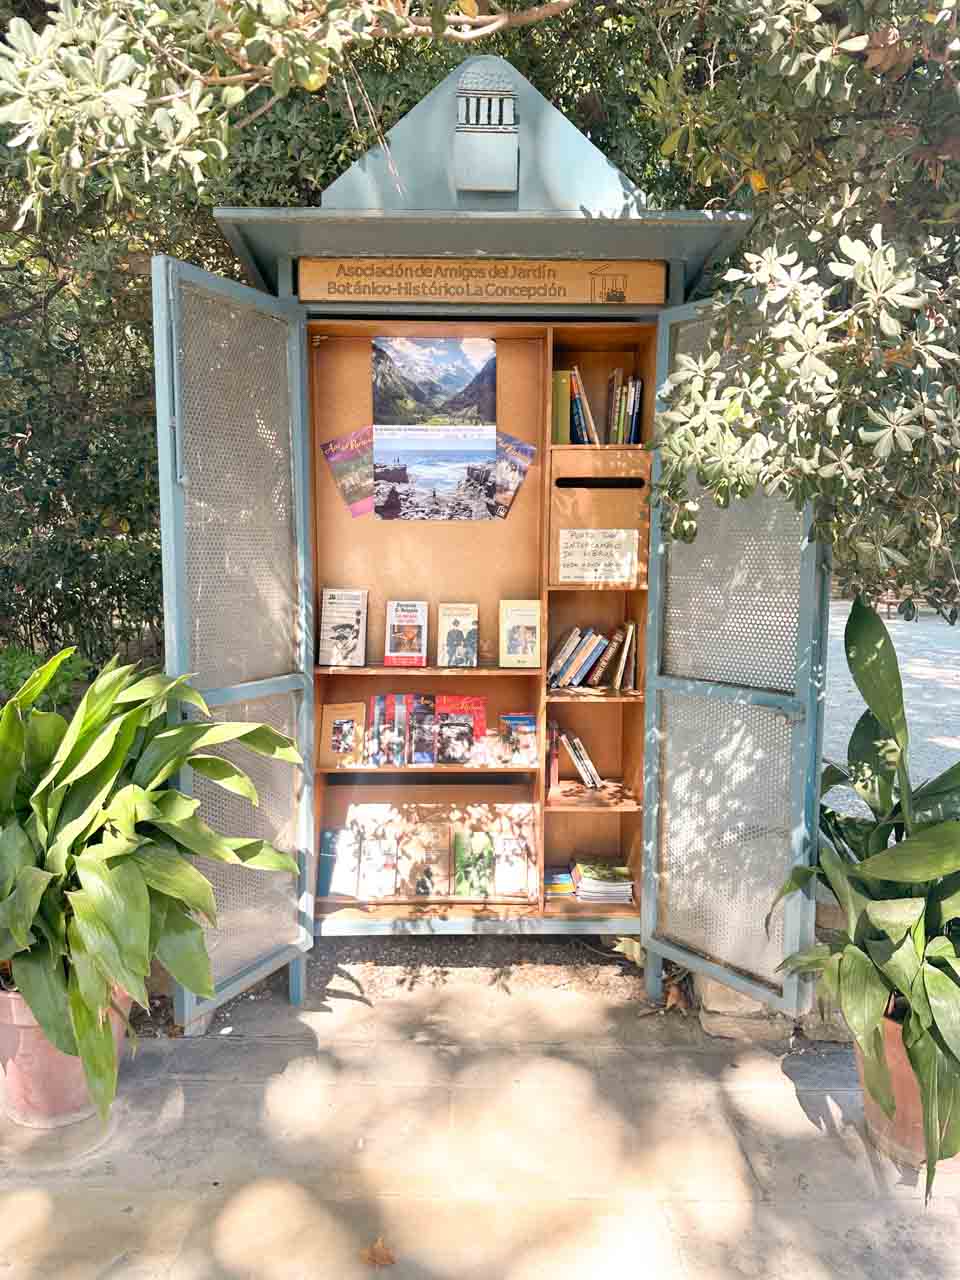 A blue book exchange booth filled with books, under the shade of a tree in a park in Malaga, Spain